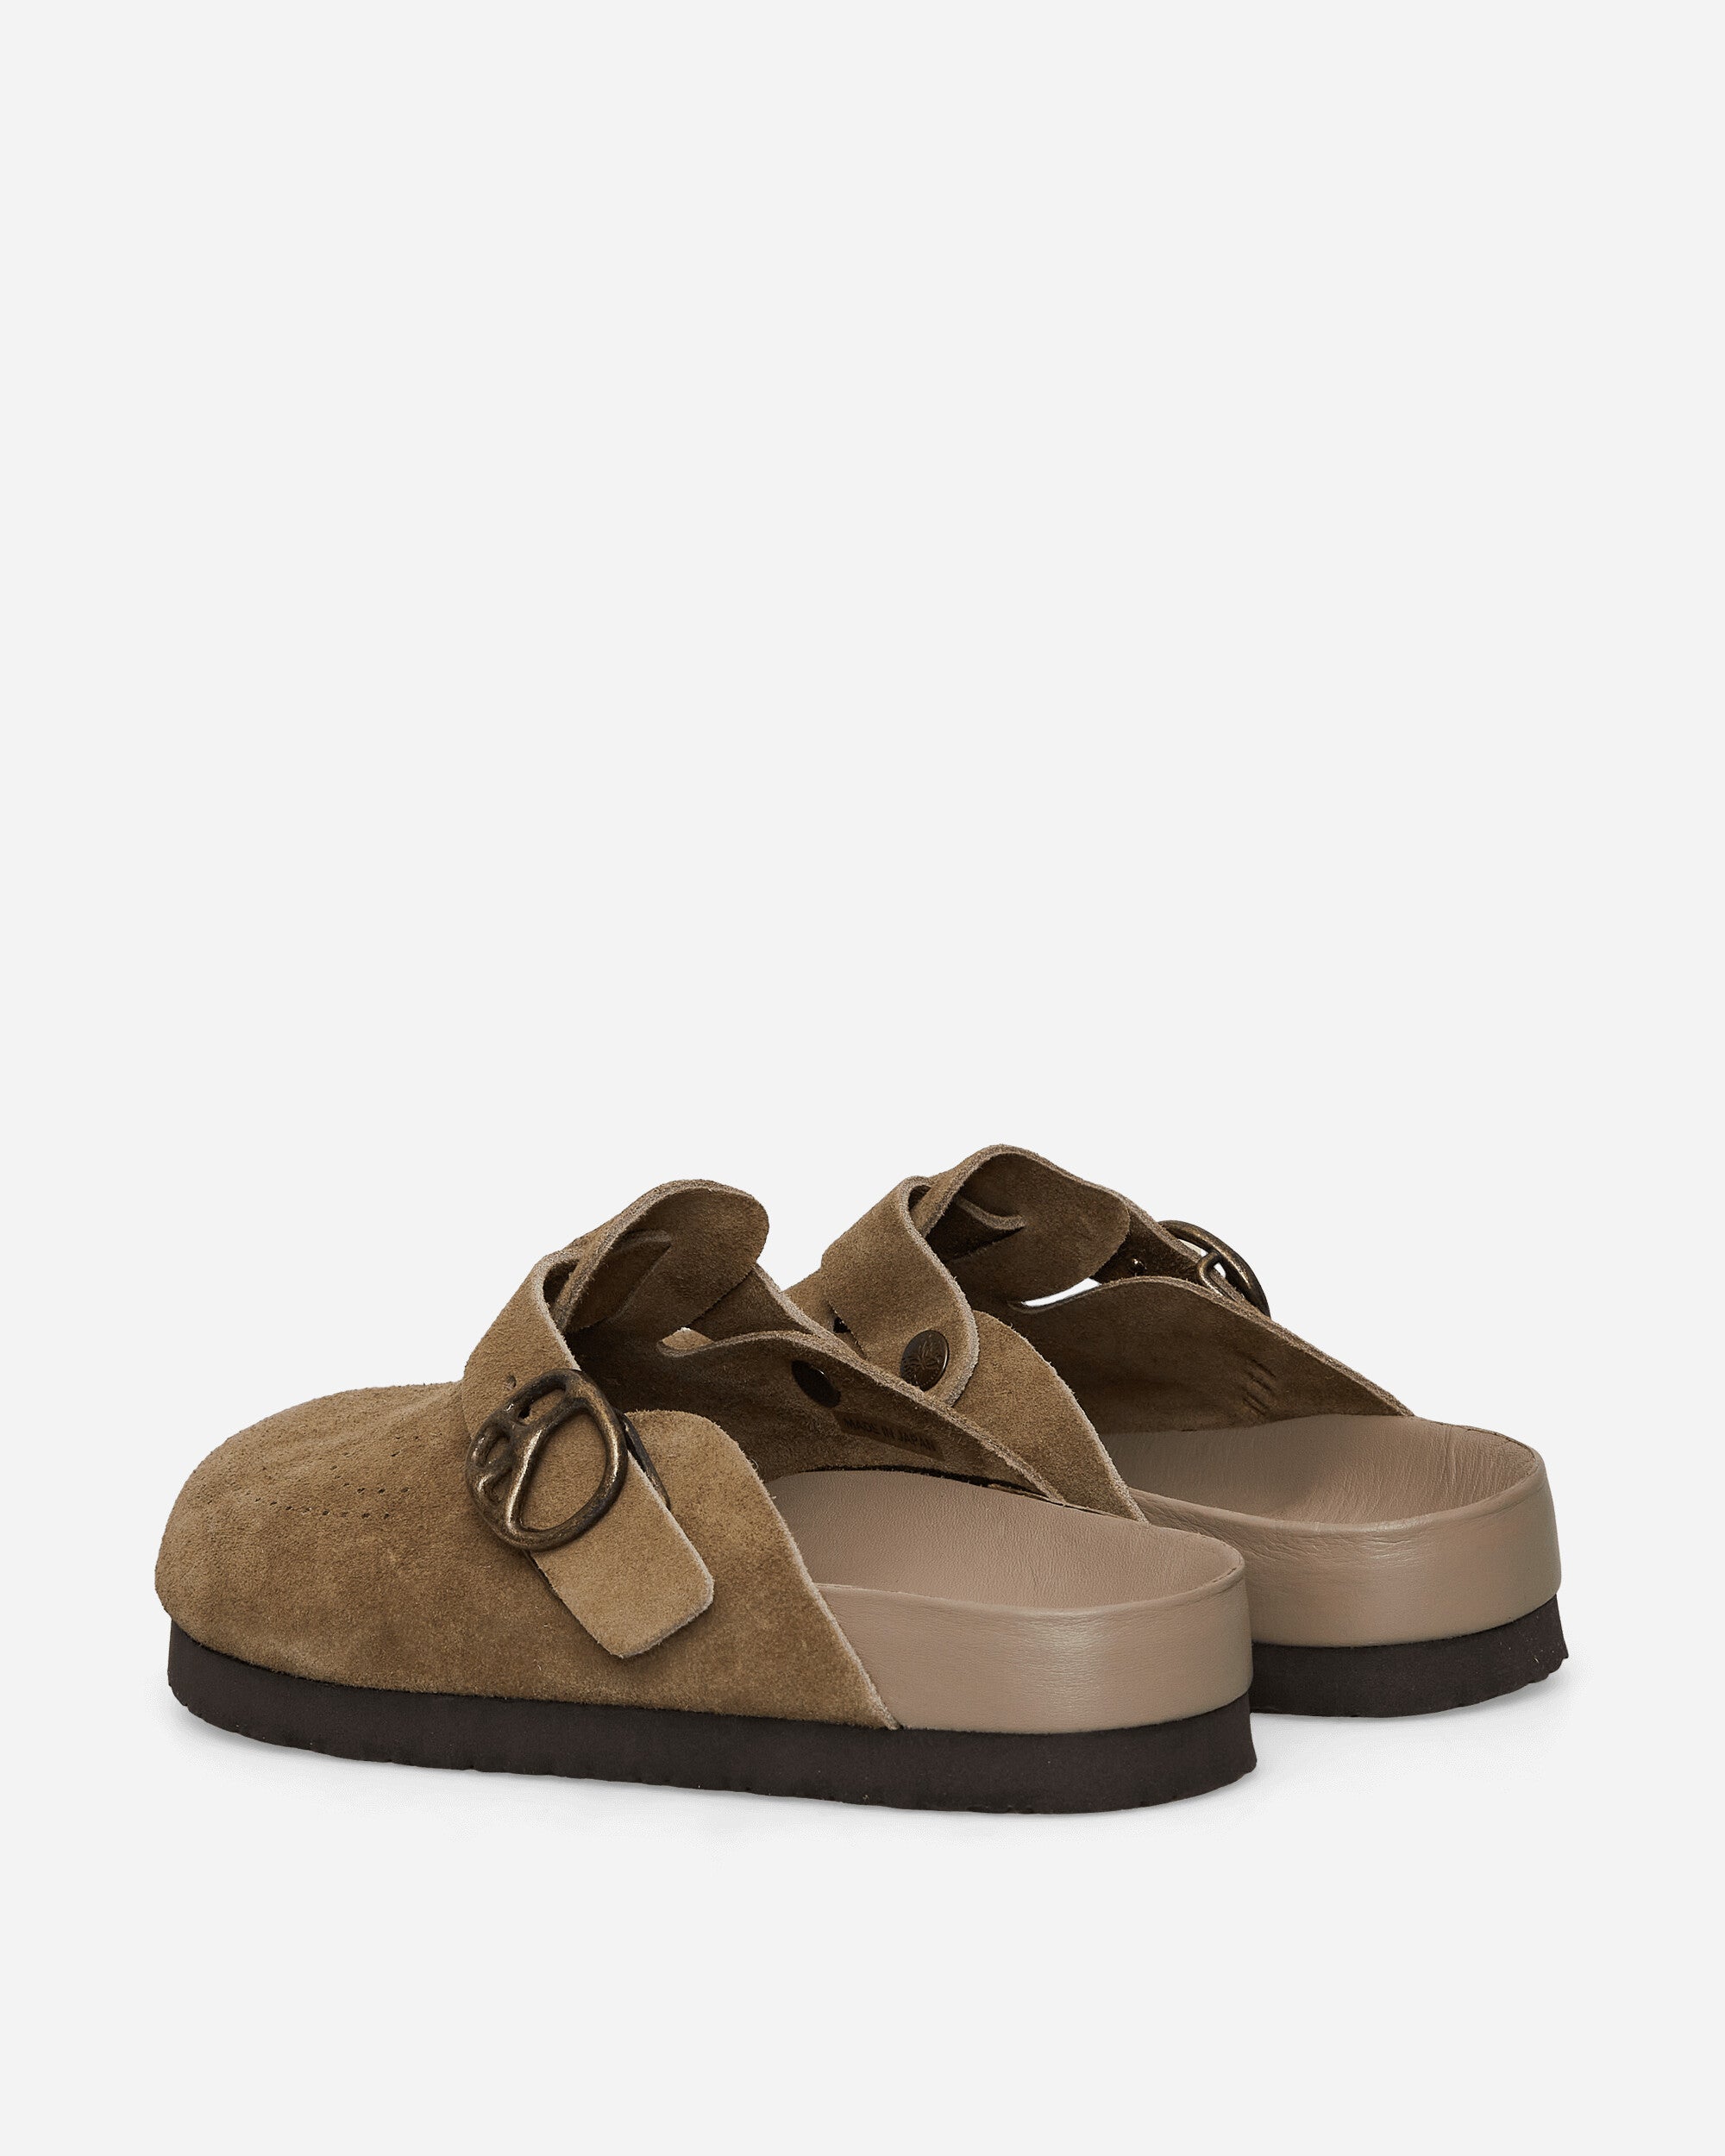 Needles Clog Sandal - Suede Lthr. Taupe Sandals and Slides Sandals and Mules OT057 A